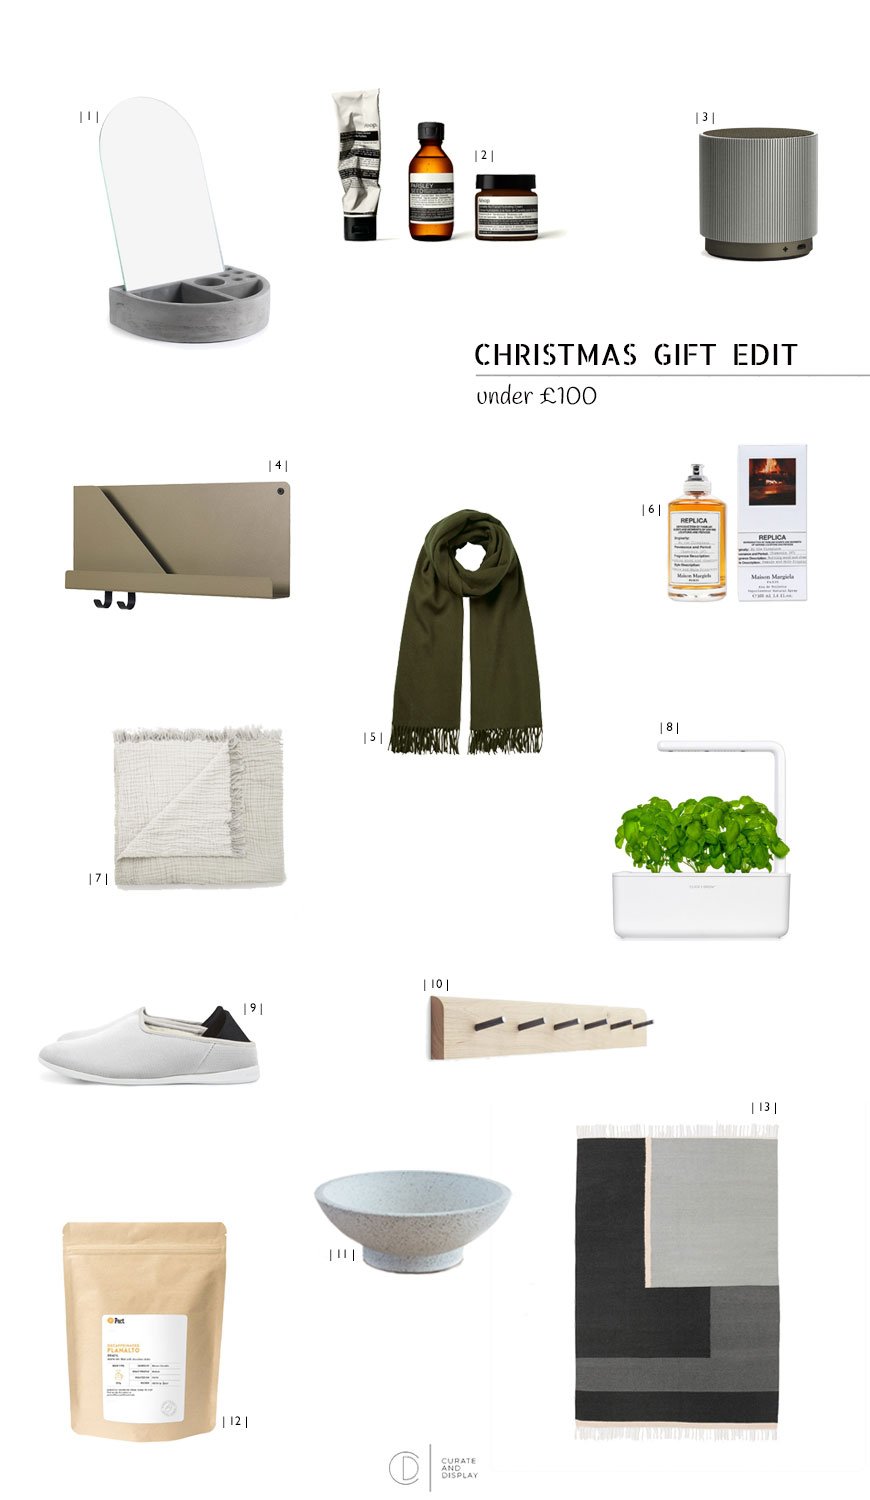 Christmas gift edit, Christmas gift guide, Christmas gifts under £100, gift guide.